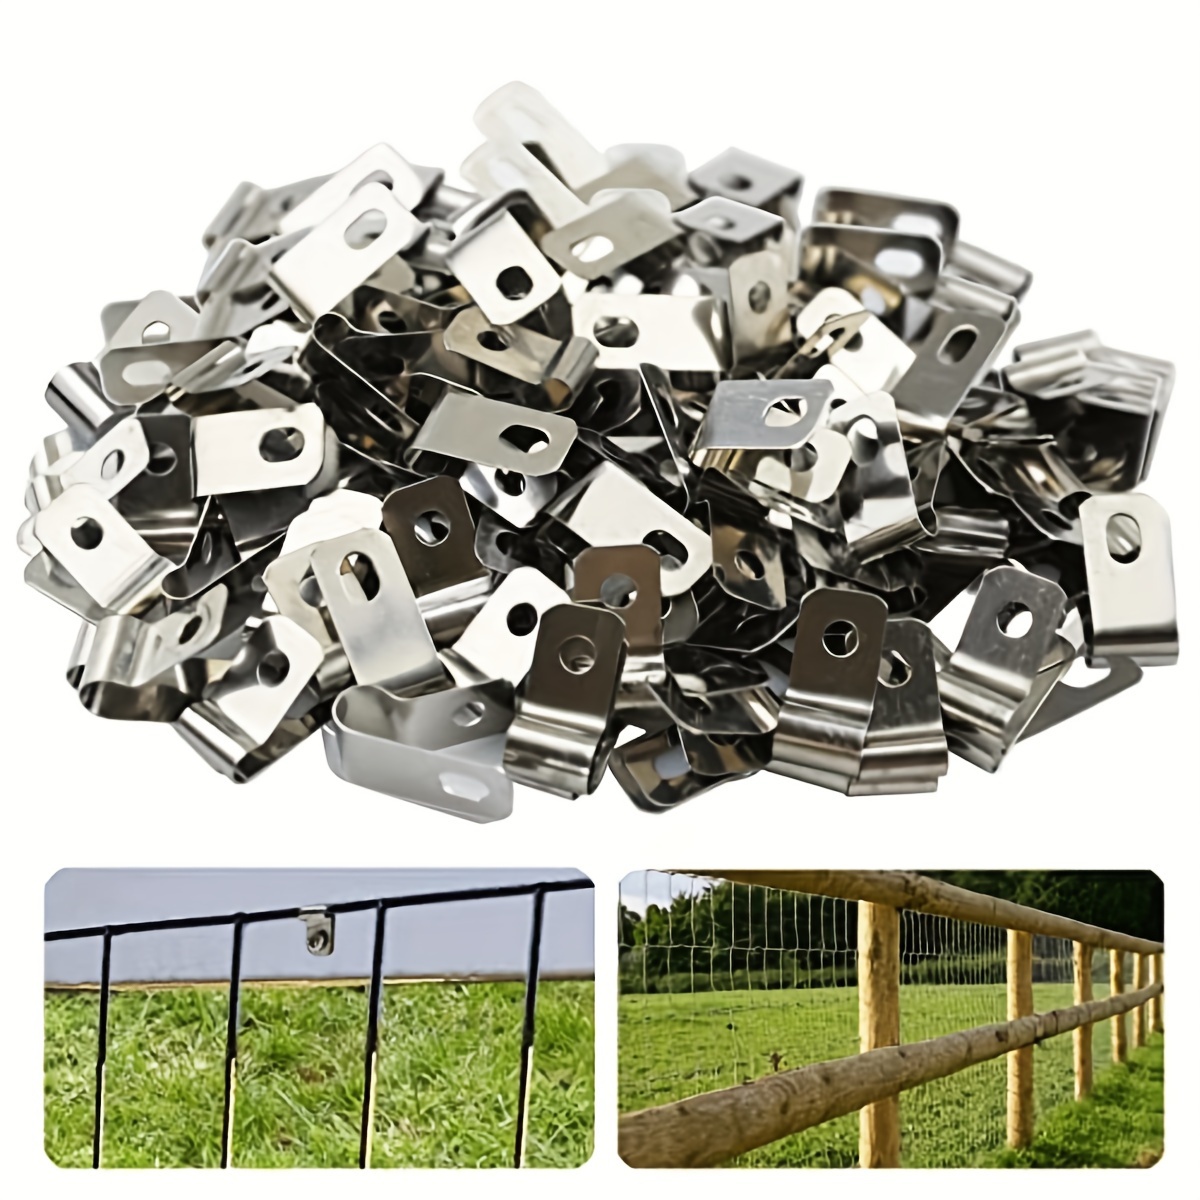 

200/300/500 Pcs Fence Wire Clamps Agricultural Fencing Mounting Clips, Stainless Steel Wire Clips Cord Clamp For Mount 12-16 Gauge Welded Wire To Wood, Metal Or Vinyl Fence